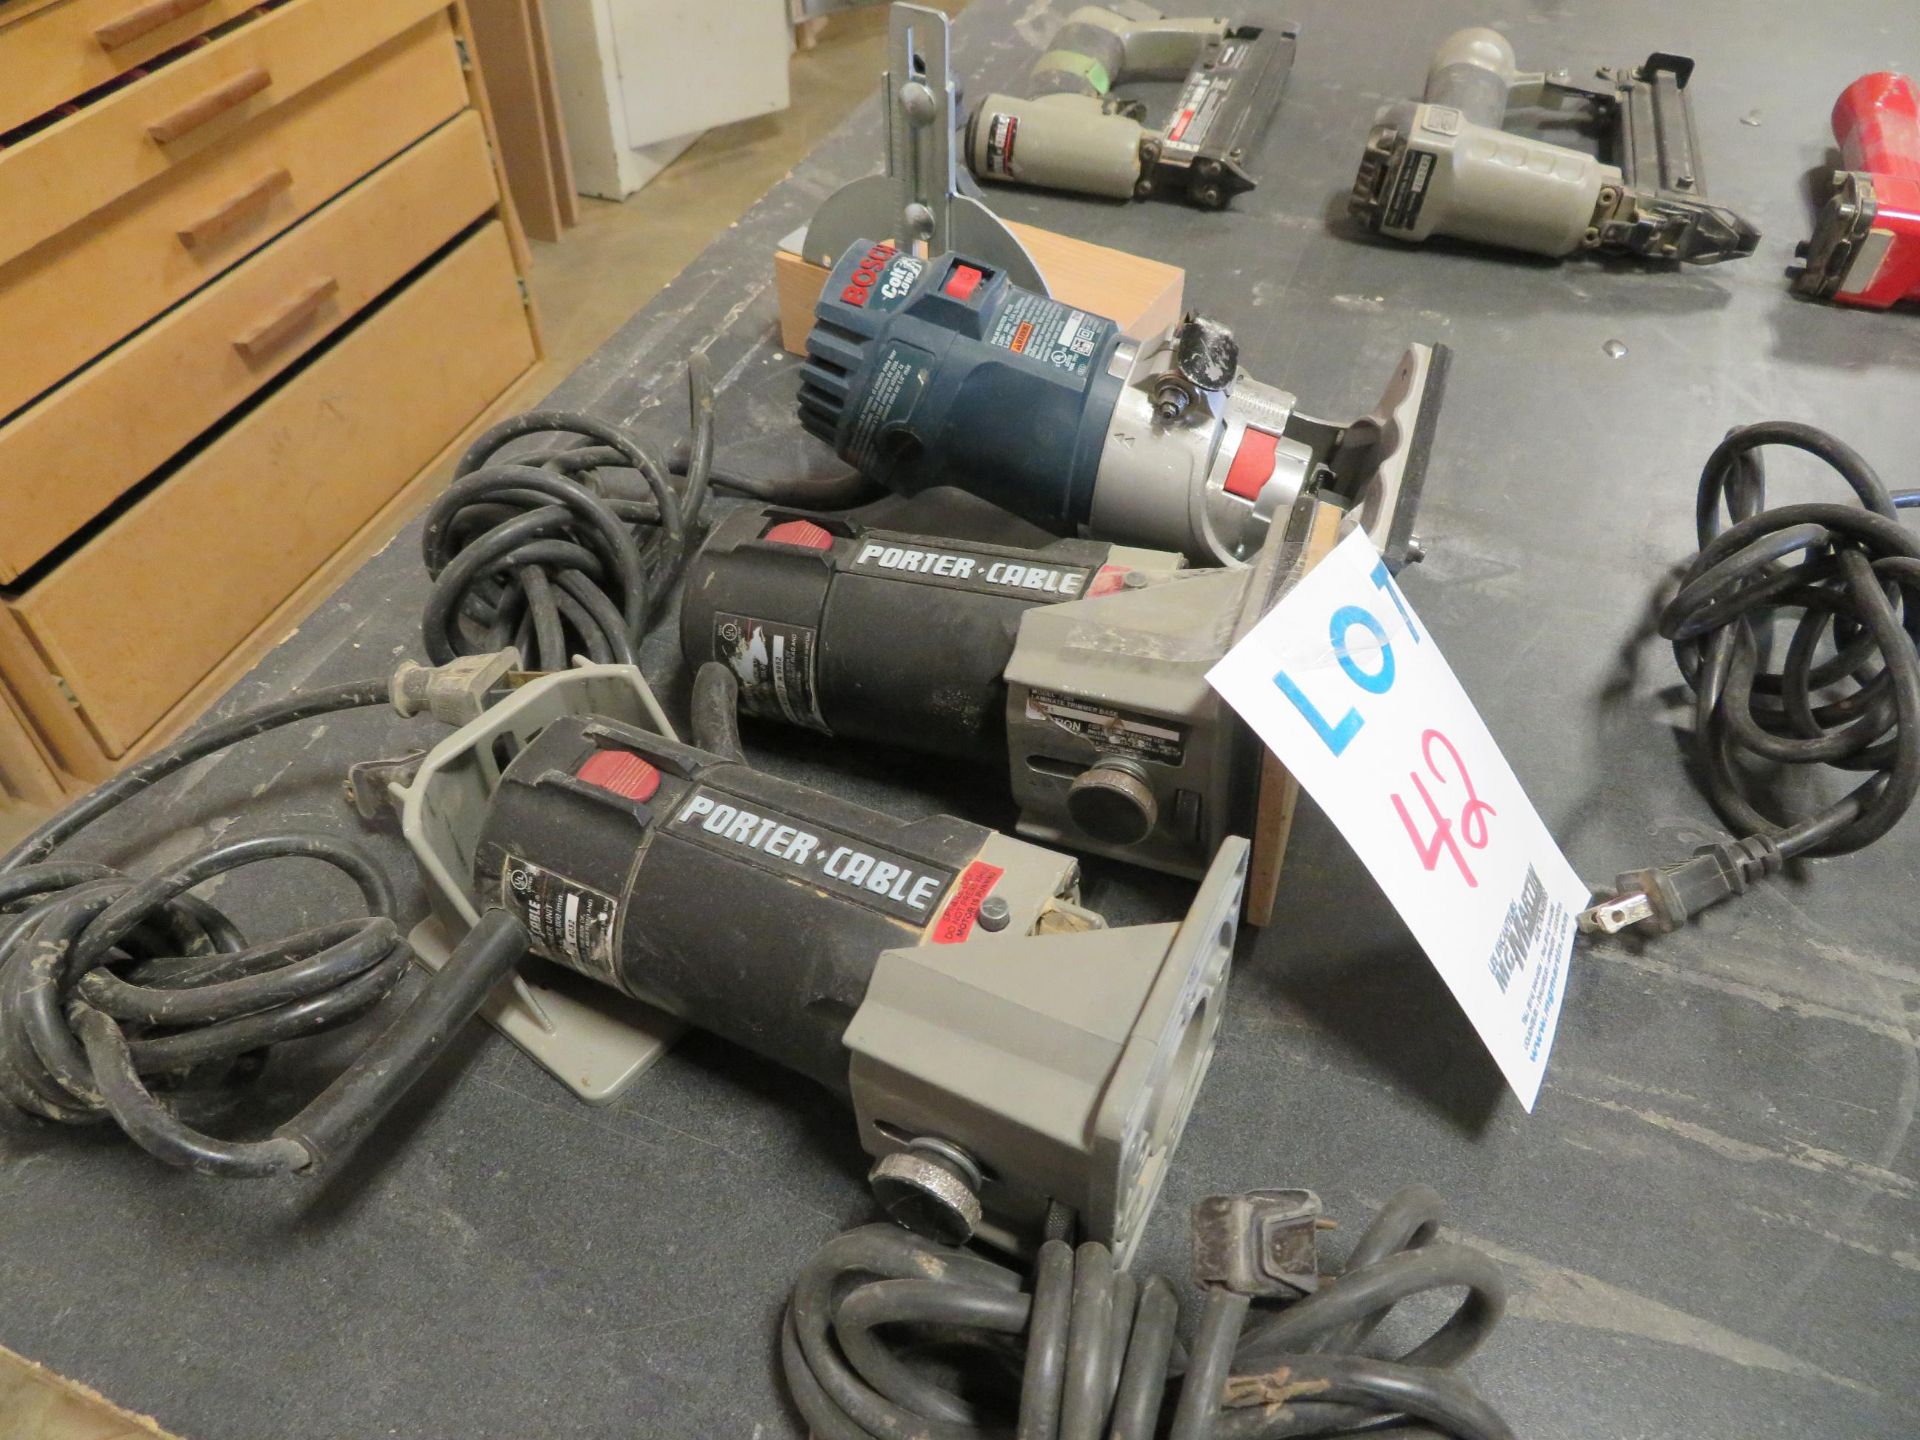 LOT including BOSCH, PORTER CABLE routers (qty 3) - Image 2 of 2